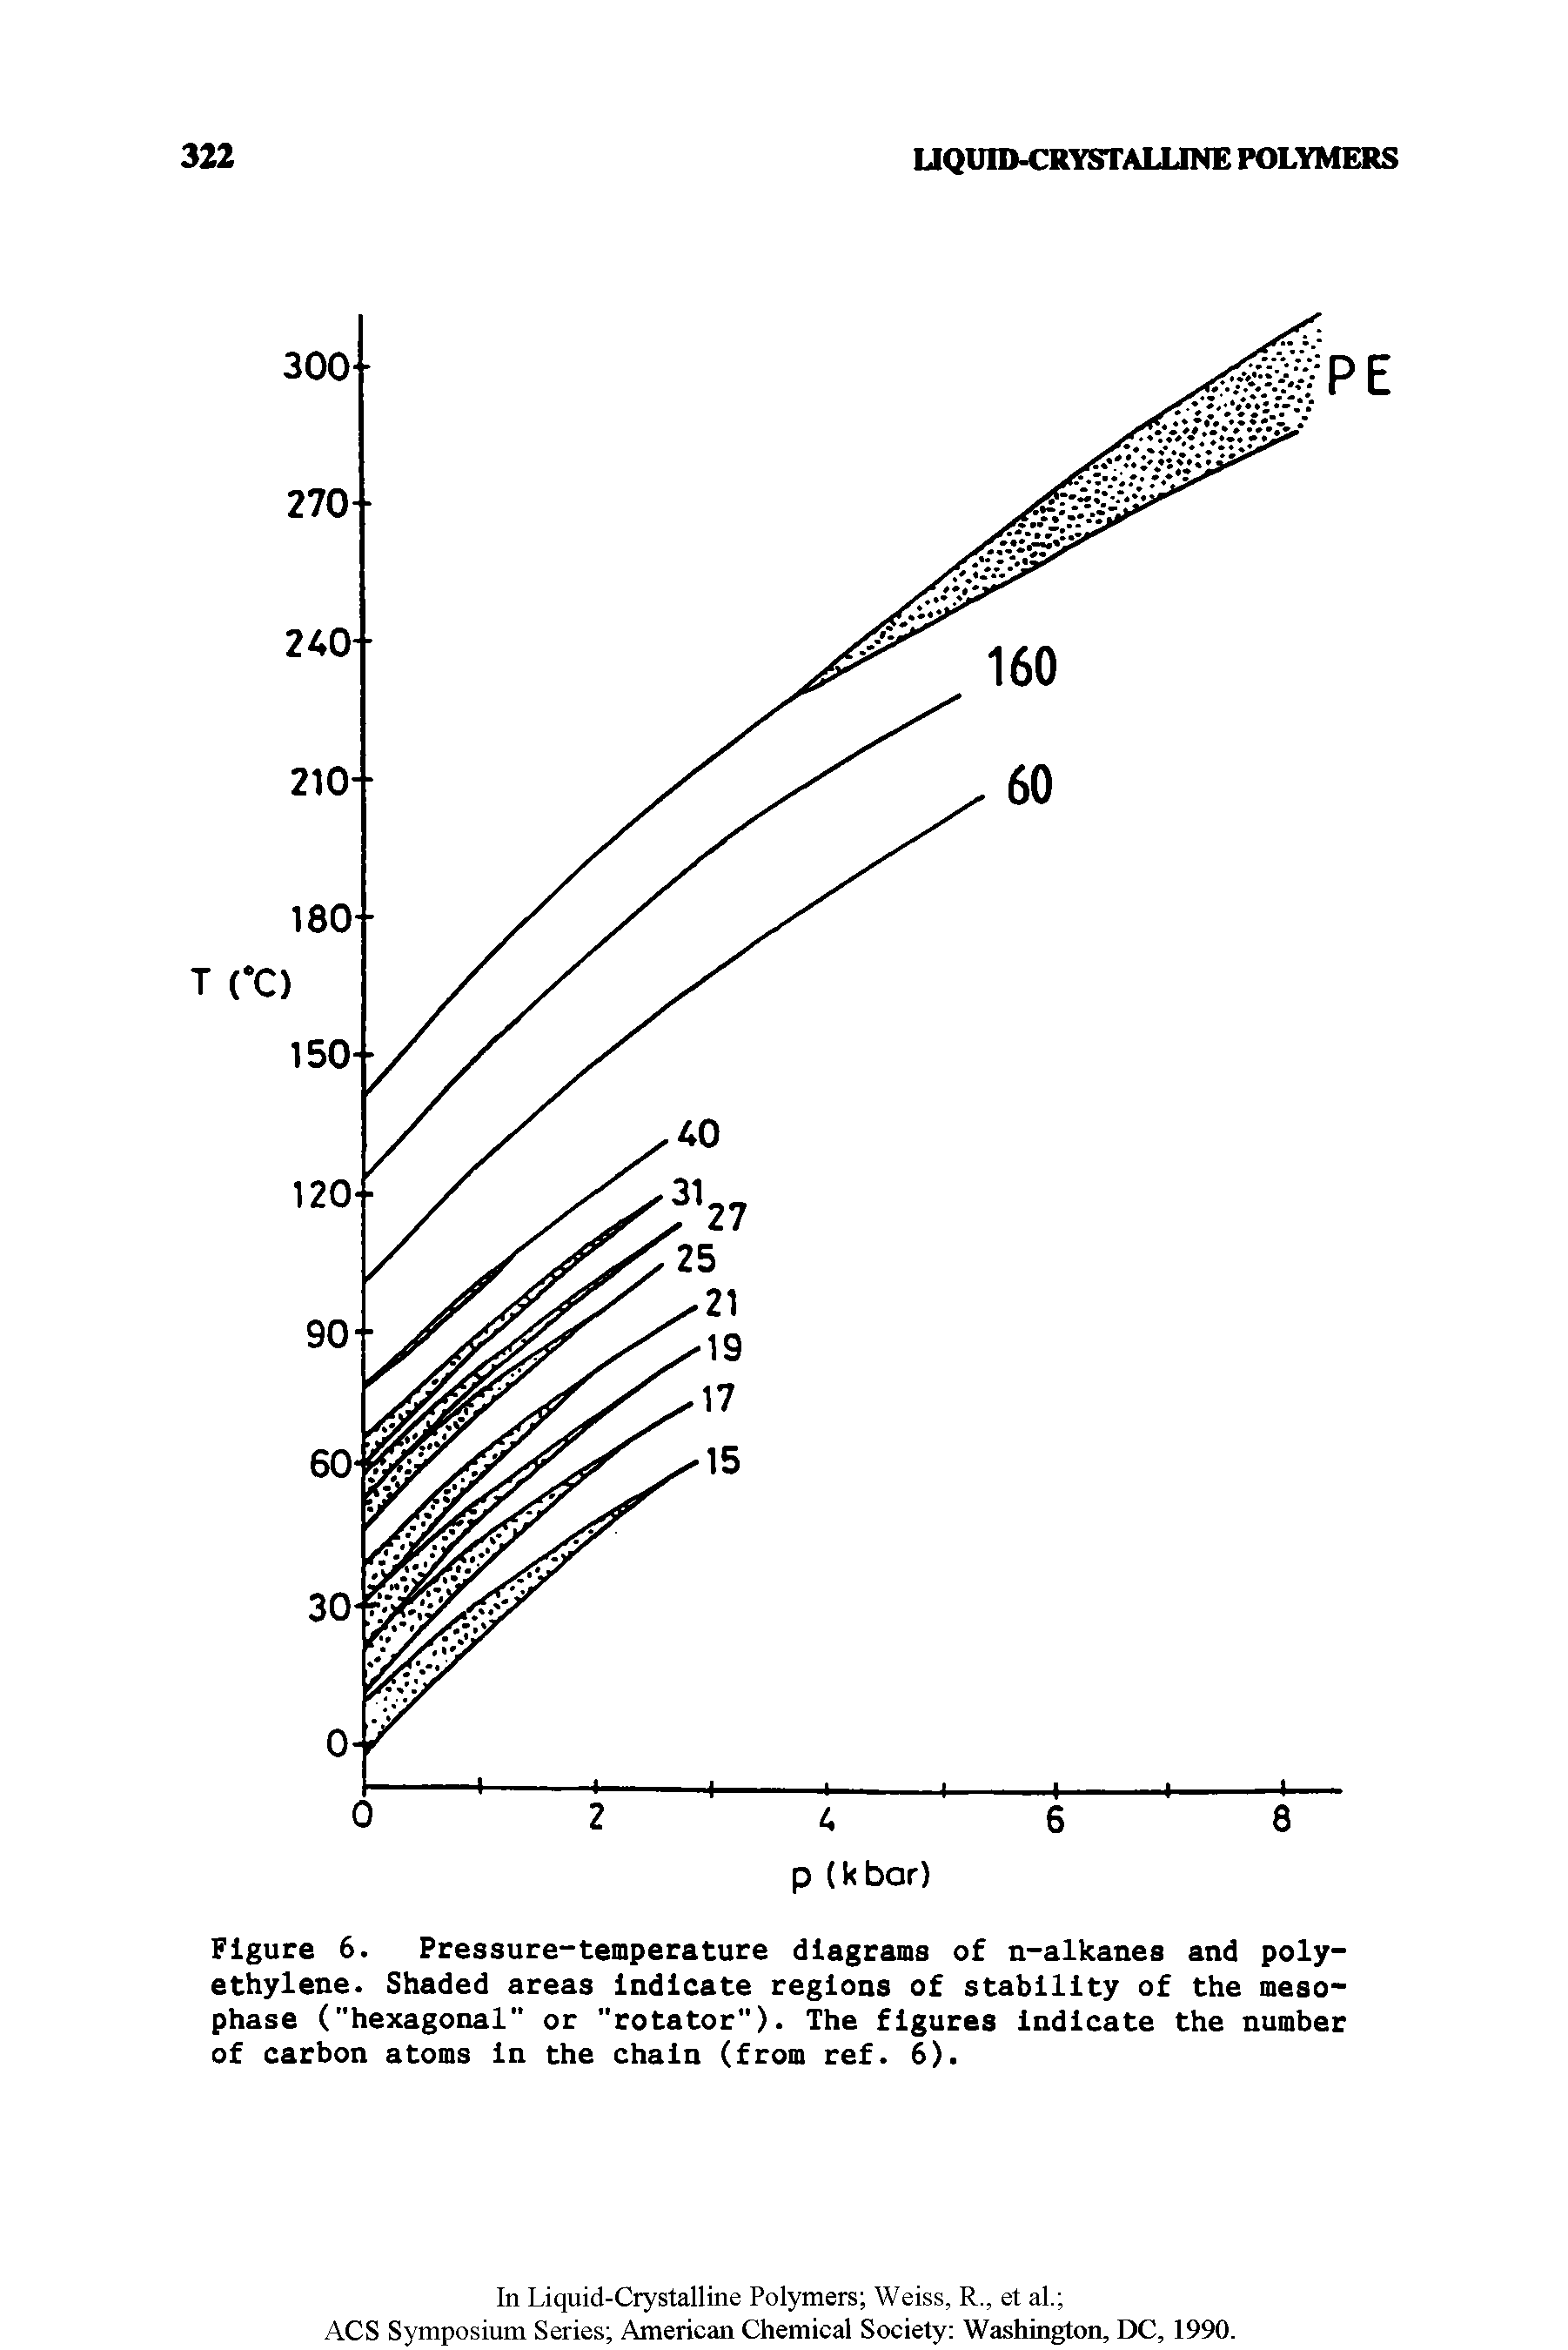 Figure 6. Pressure-temperature diagrams of n-alkanes and polyethylene. Shaded areas Indicate regions of stability of the meso-phase ("hexagonal" or "rotator"). The figures Indicate the number of carbon atoms In the chain (from ref. 6).